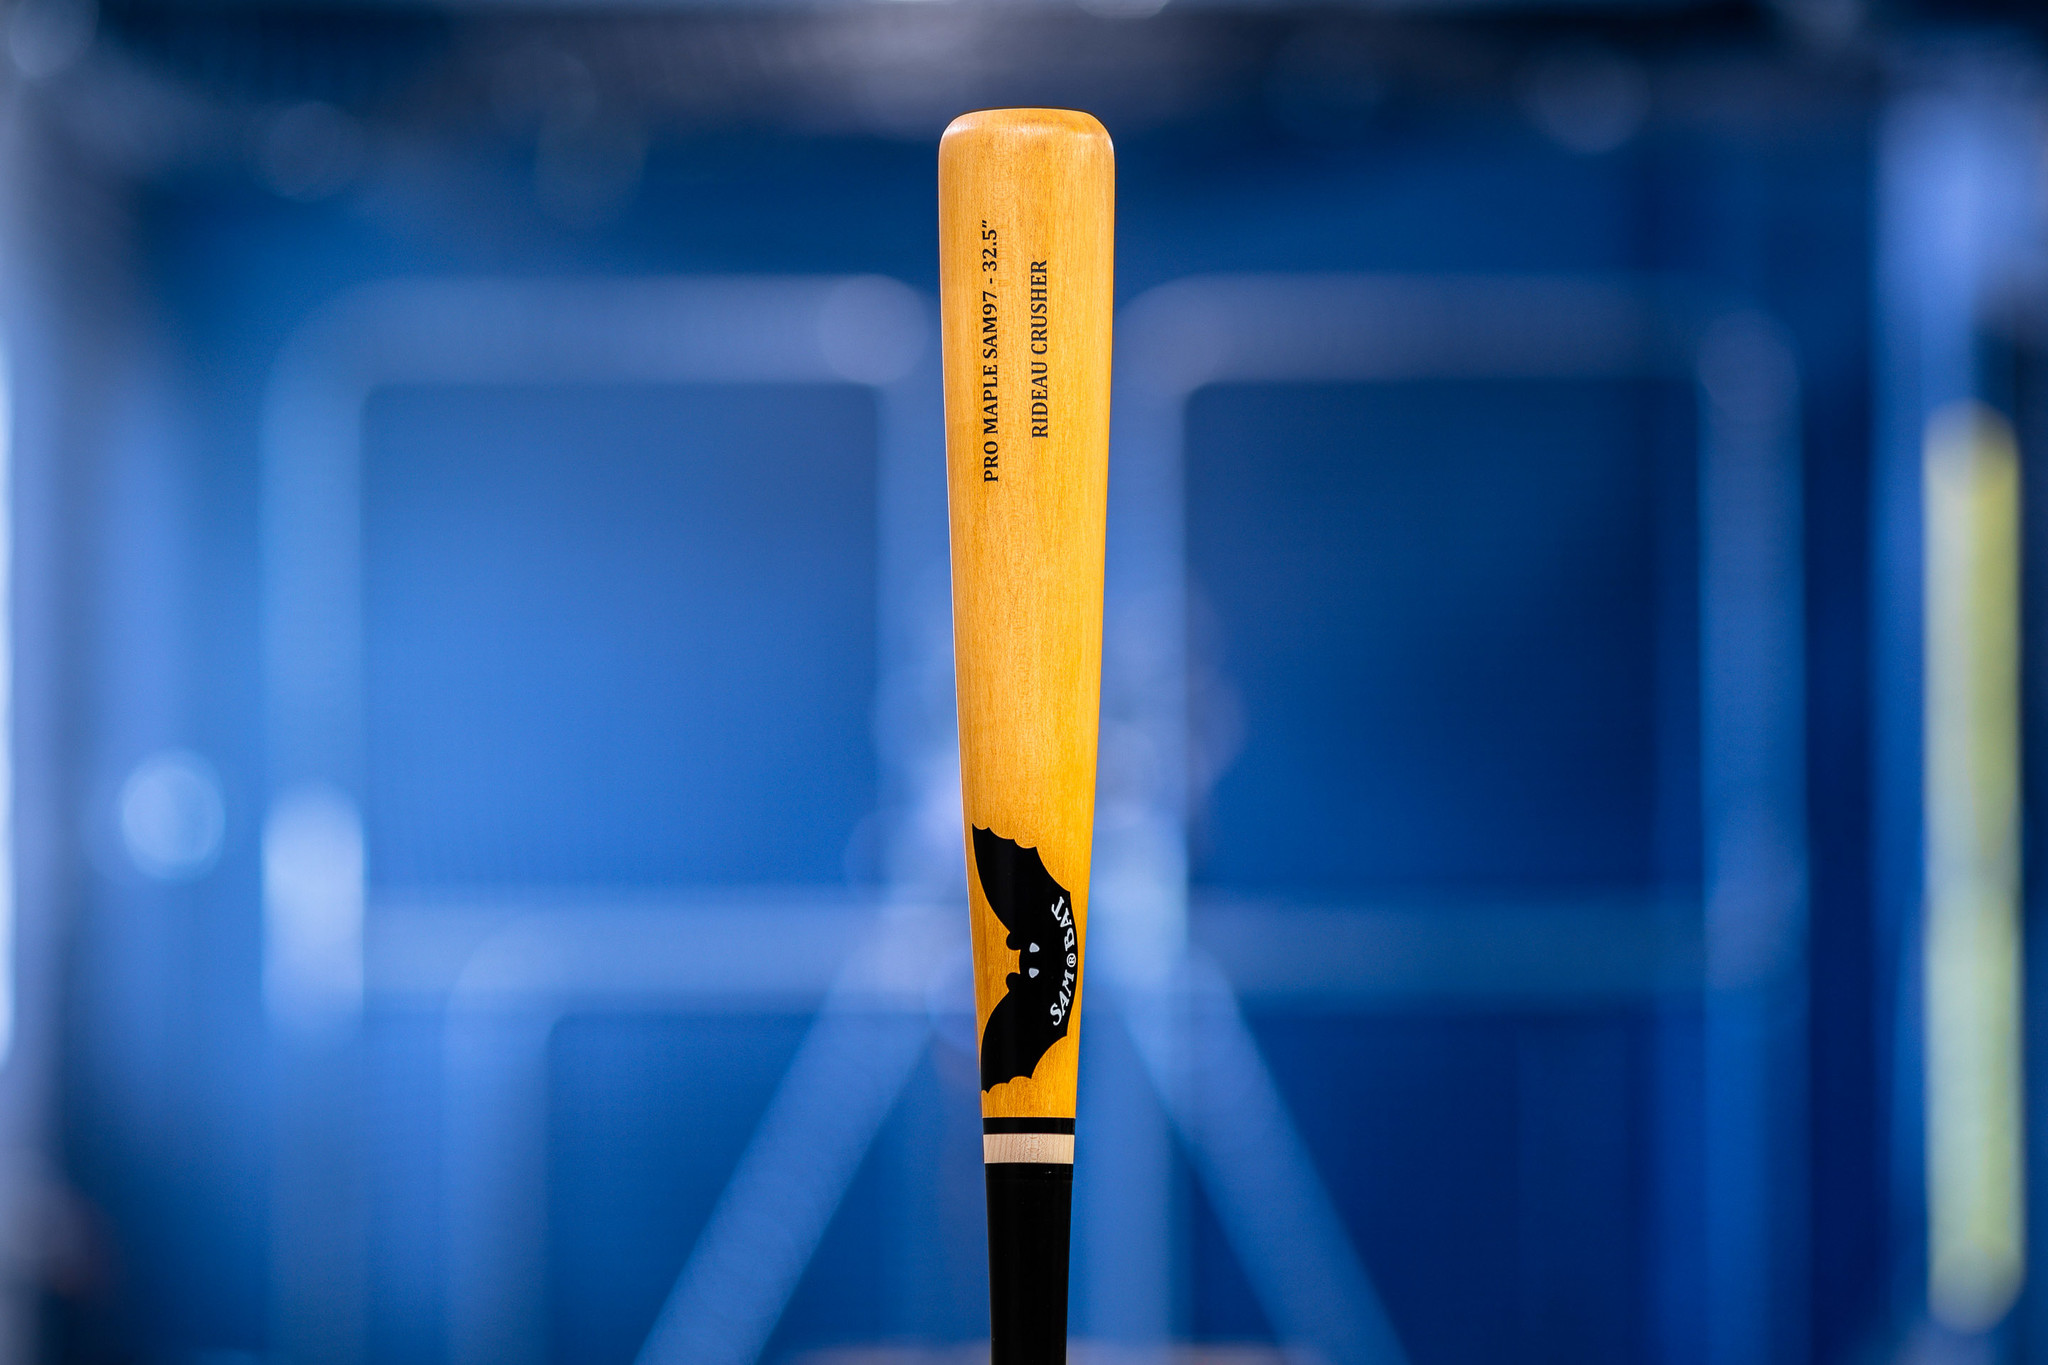 A Sam Bat standing vertical floating in the air in front of a blurred out batting cage background.